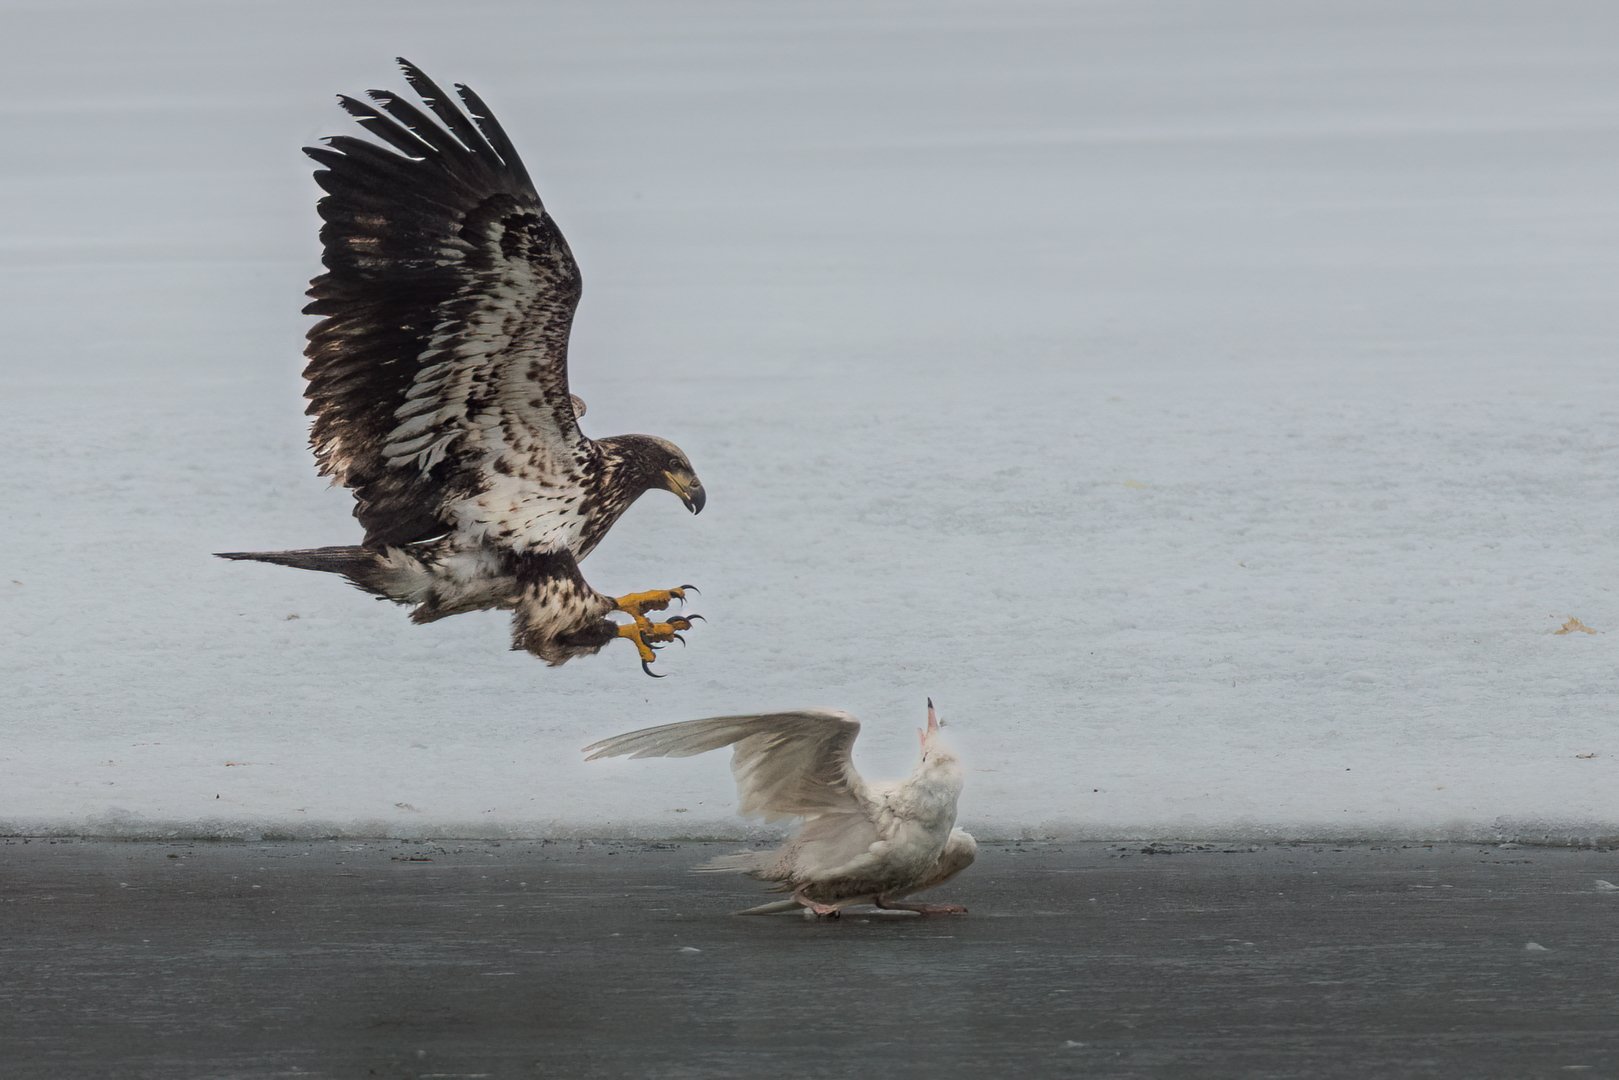 "Bald Eagle Attack" by Ian Winter